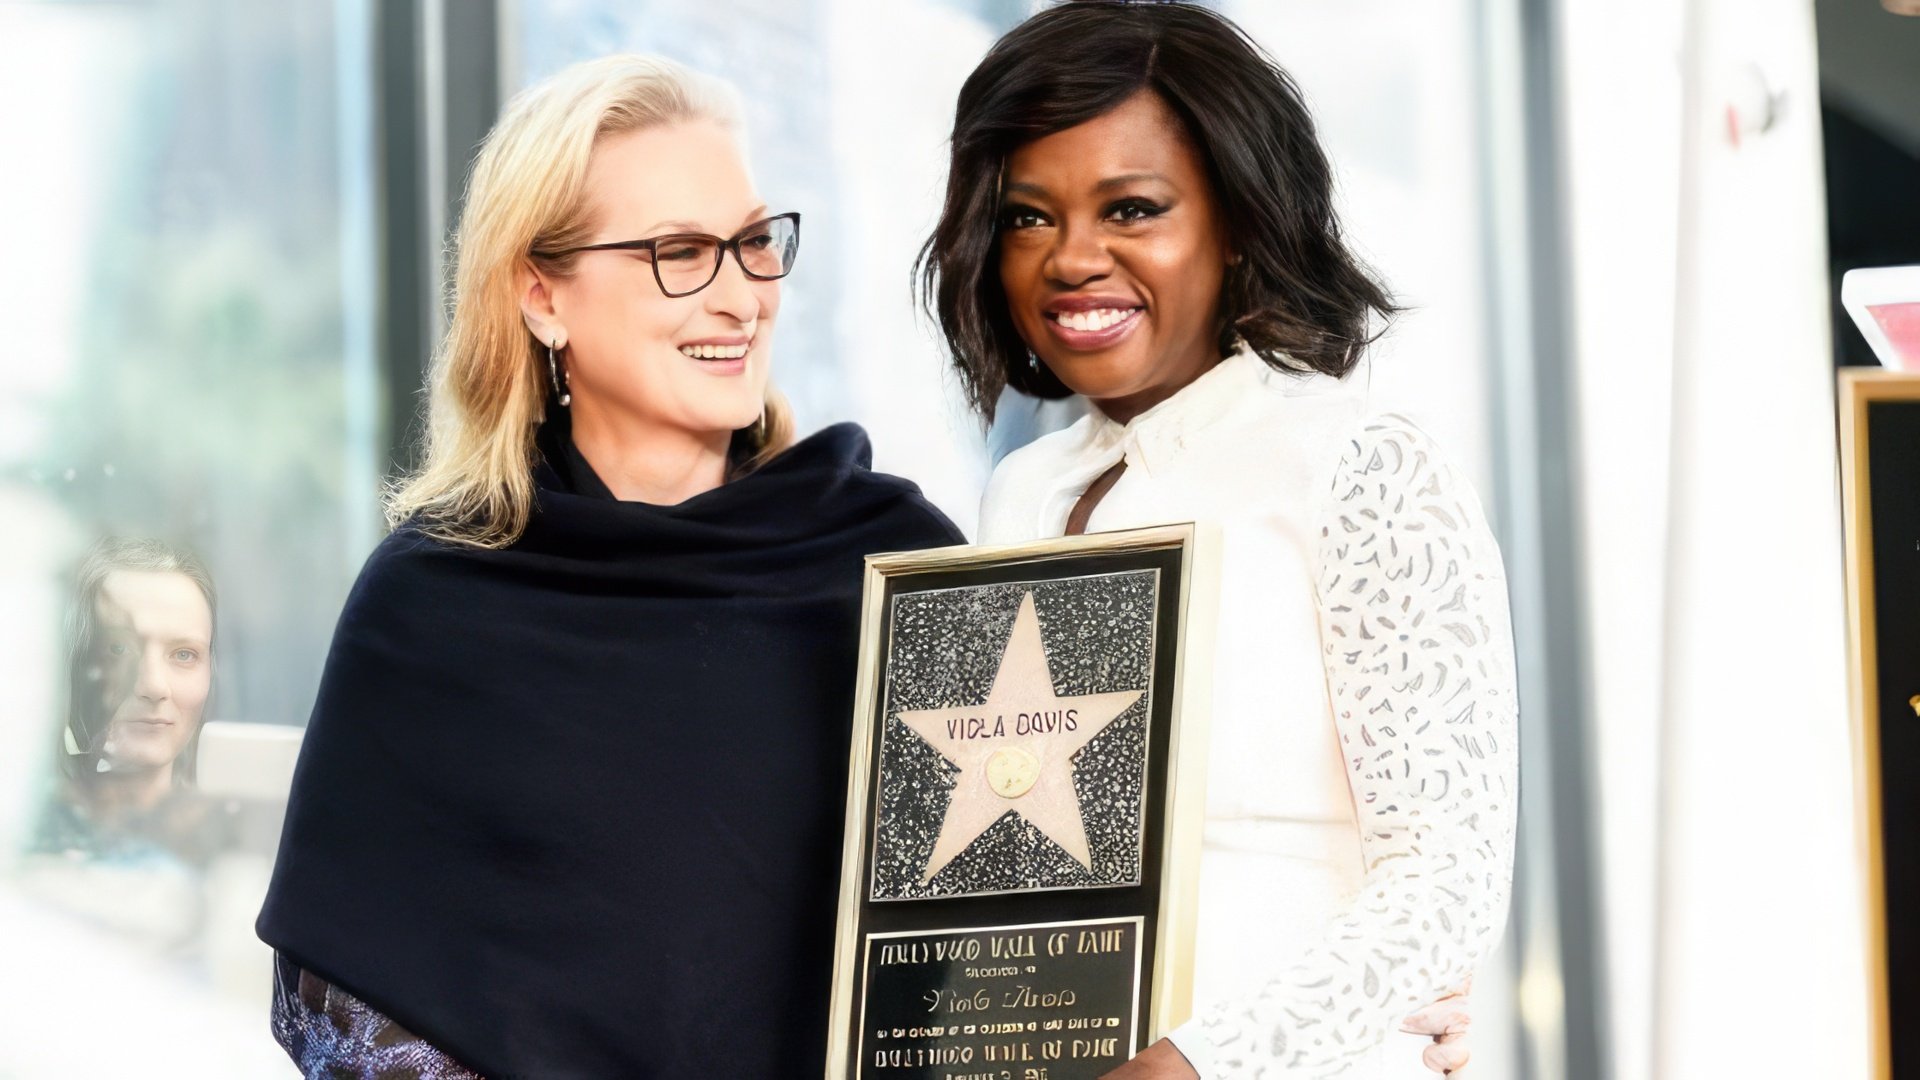 In real life, Viola Davis and Meryl Streep are good friends